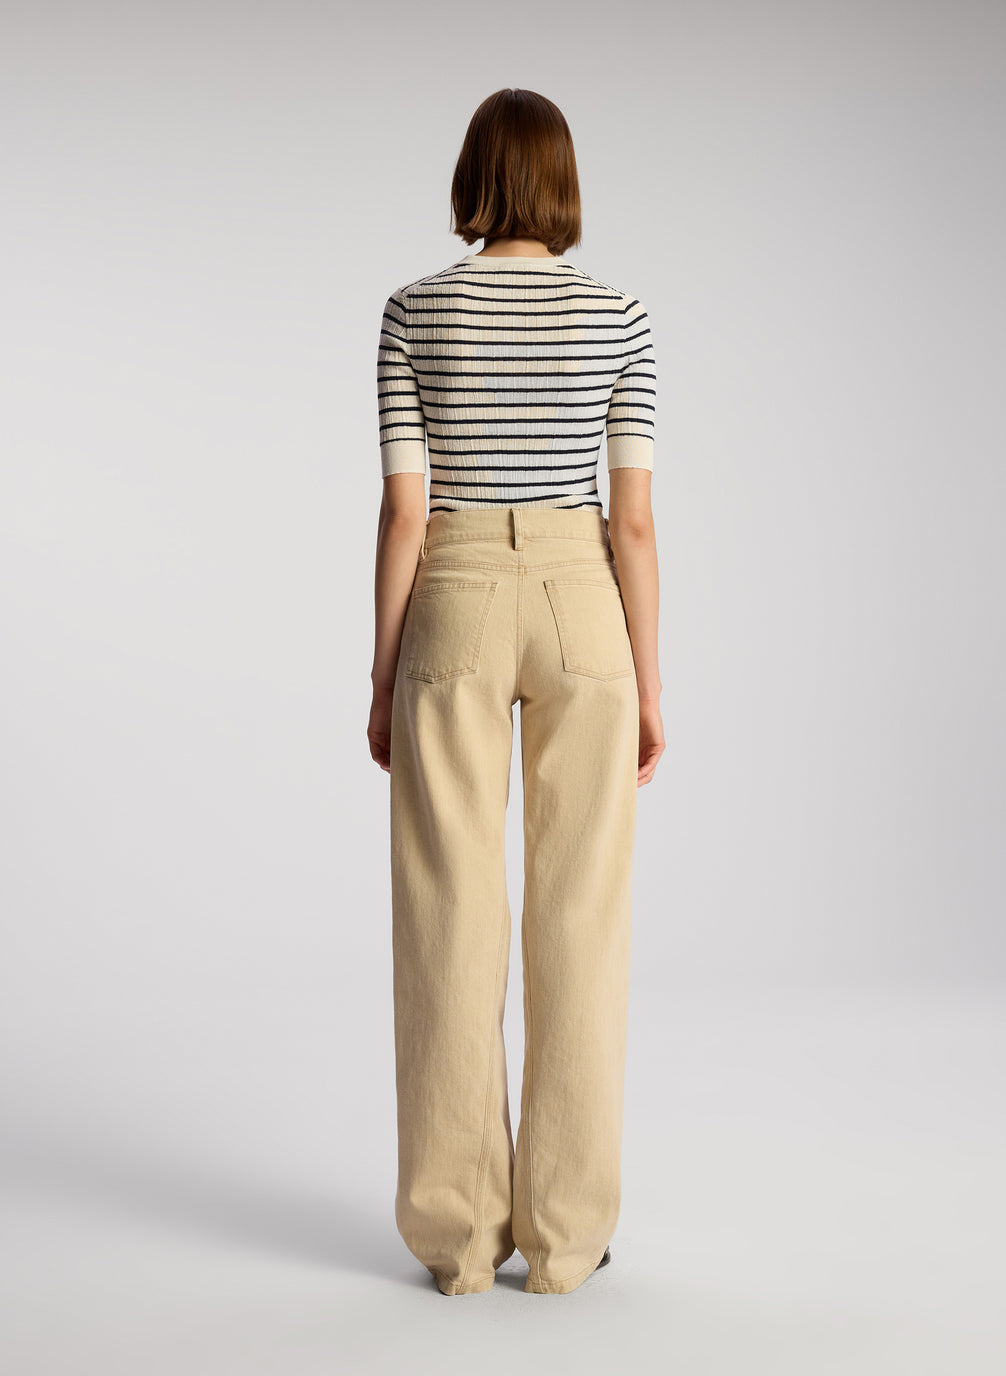 back view of woman wearing navy blue and white striped shirt and tan pants